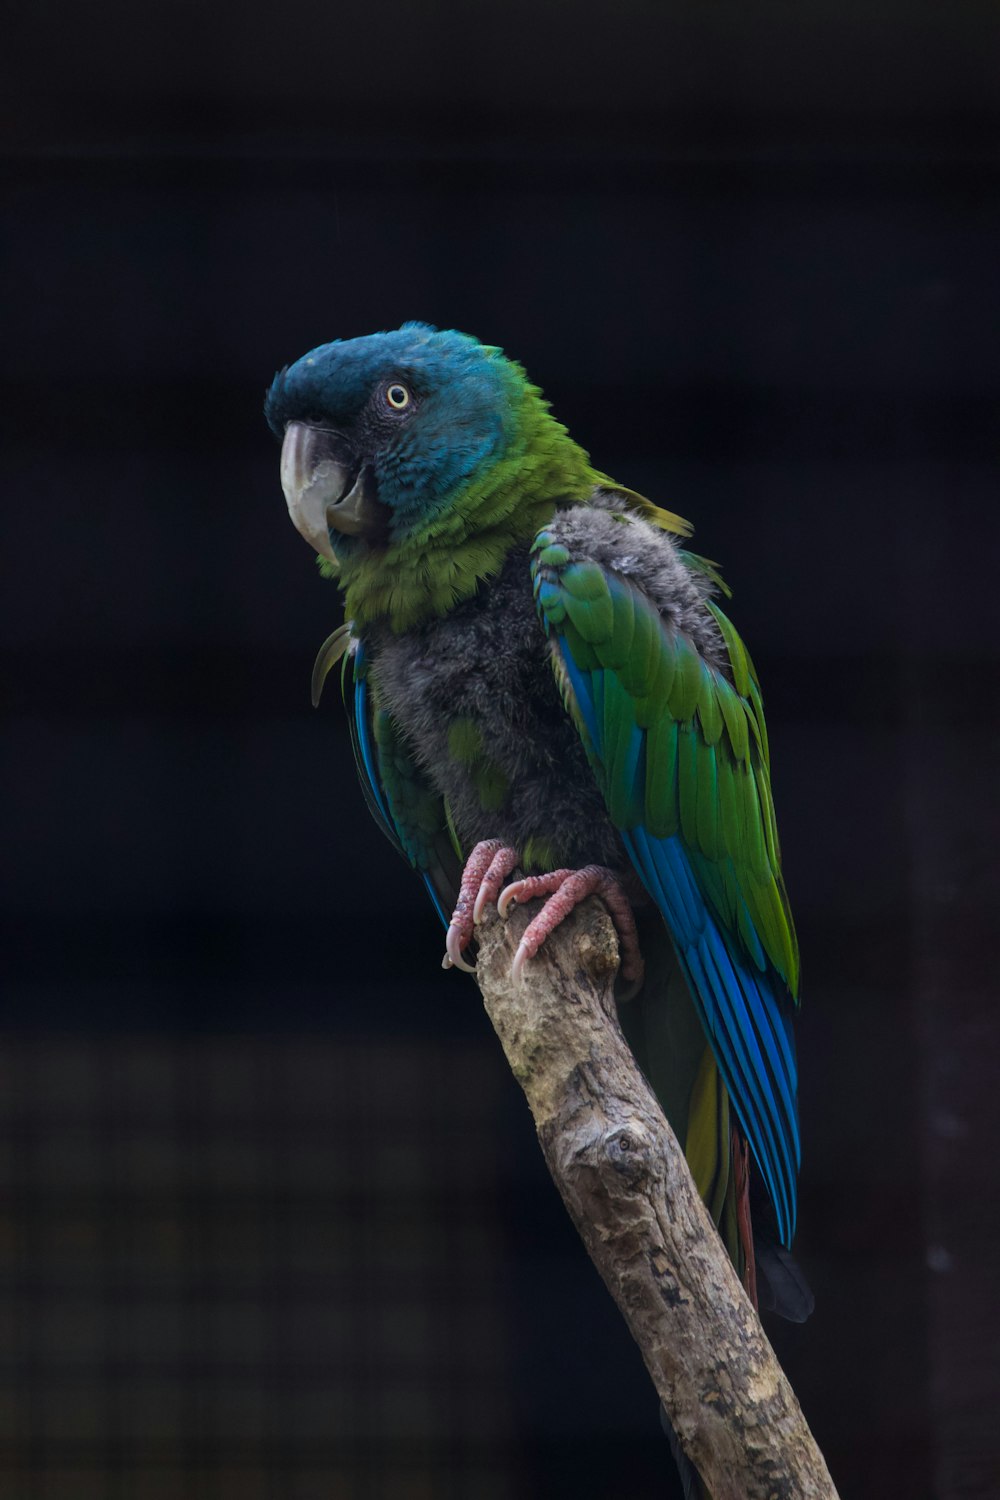 a green and blue parrot perched on a tree branch